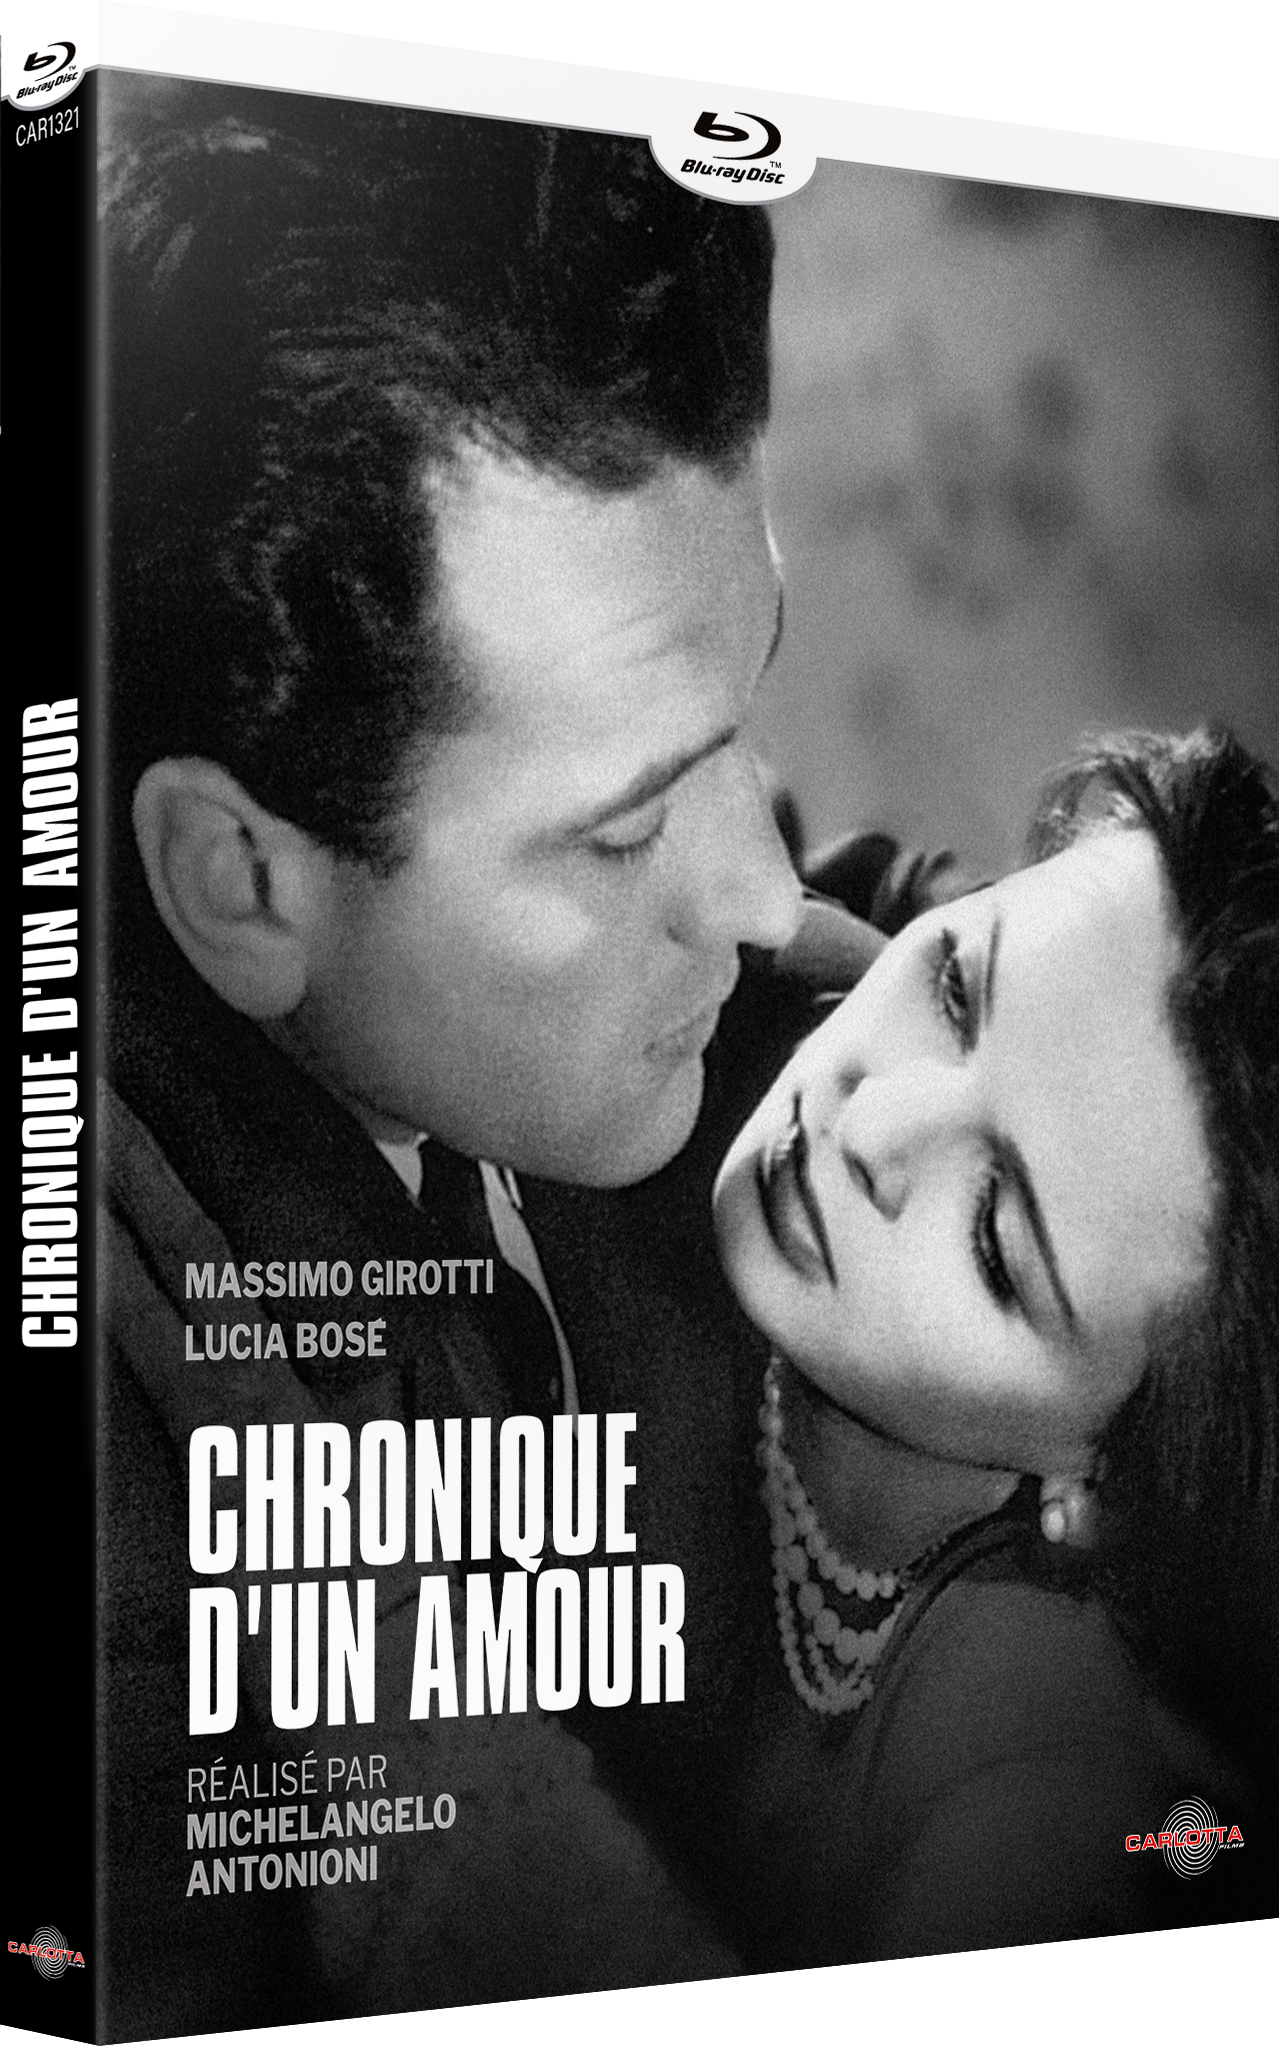 Chronicle of a Love by Michelangelo Antonioni